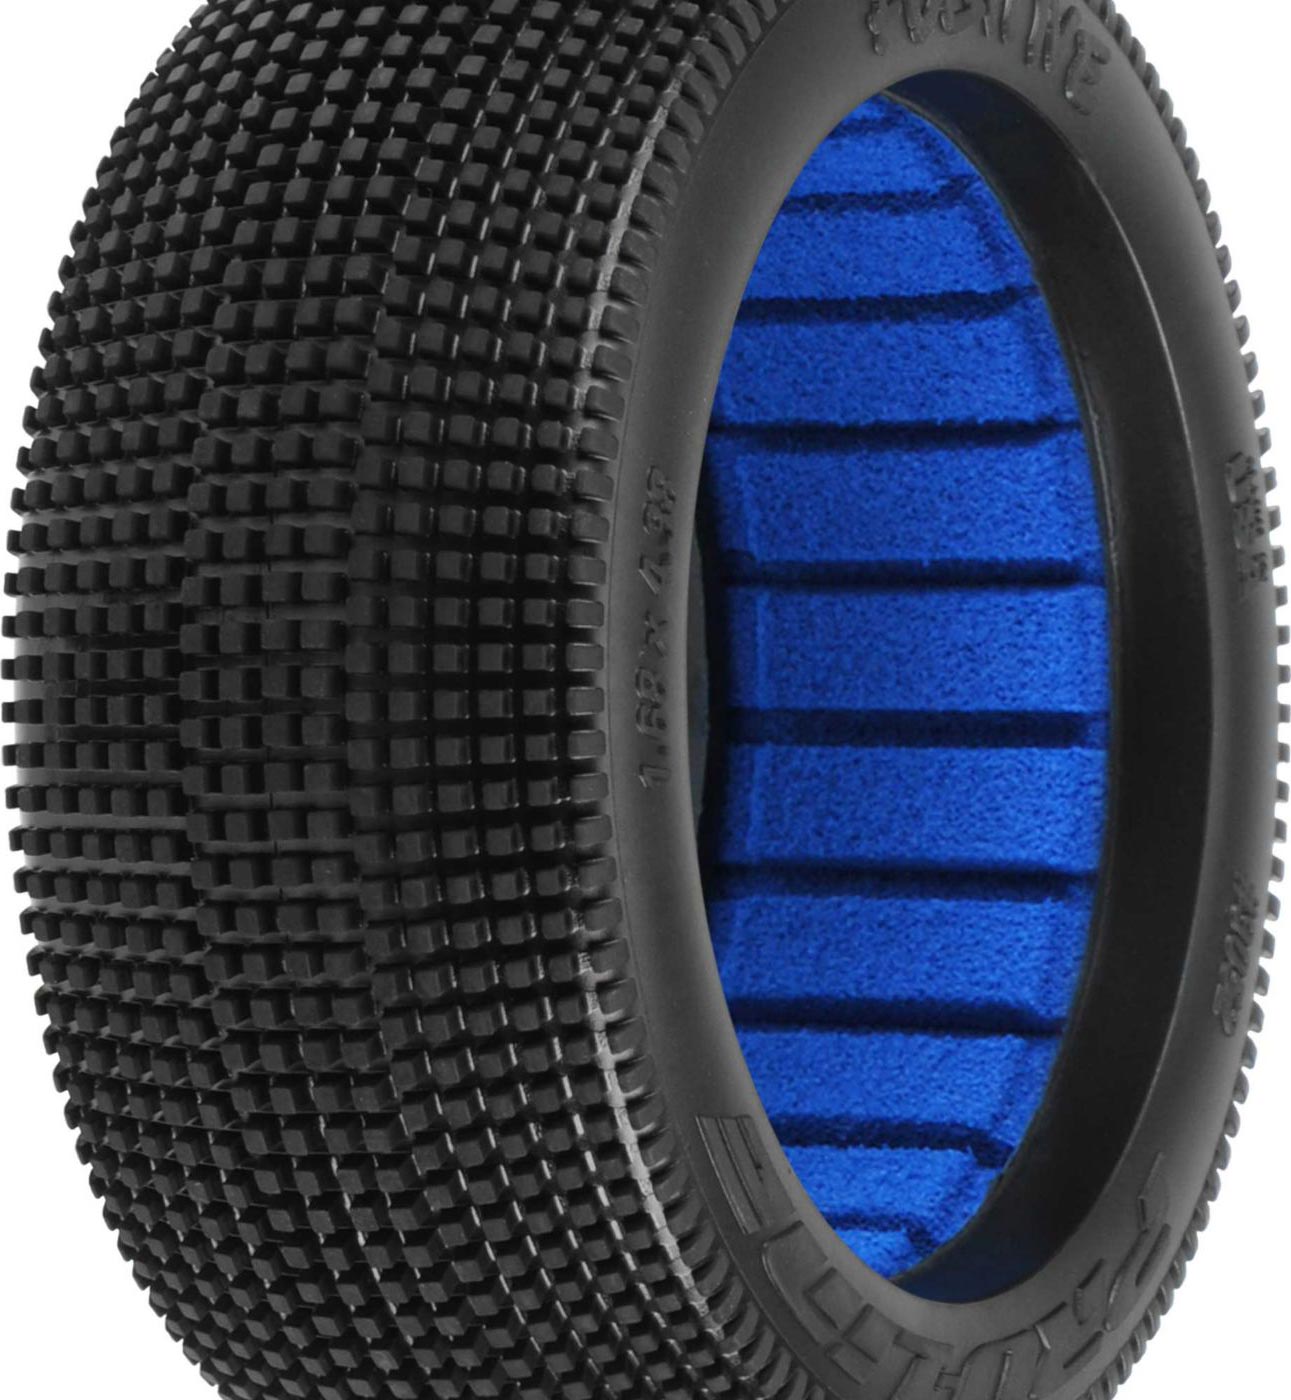 for F/R PRO9052204 2 Pro-line Fugitive S4 1:8 Buggy Tires 